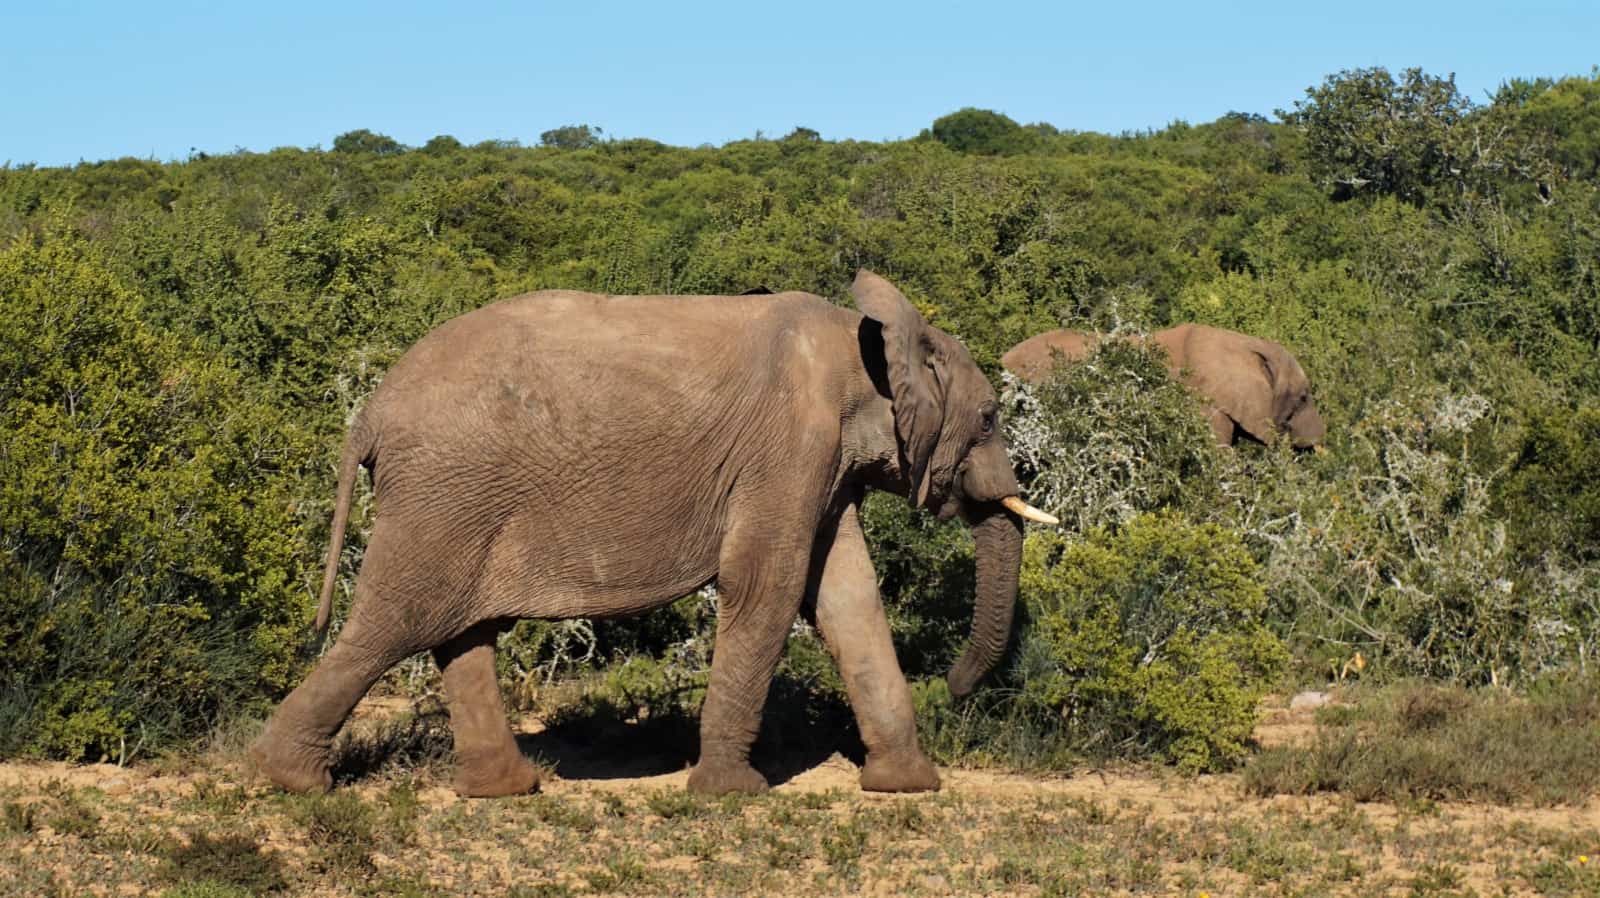 Young elephant at Addo Elephant National Park, Eastern Cape, South Africa